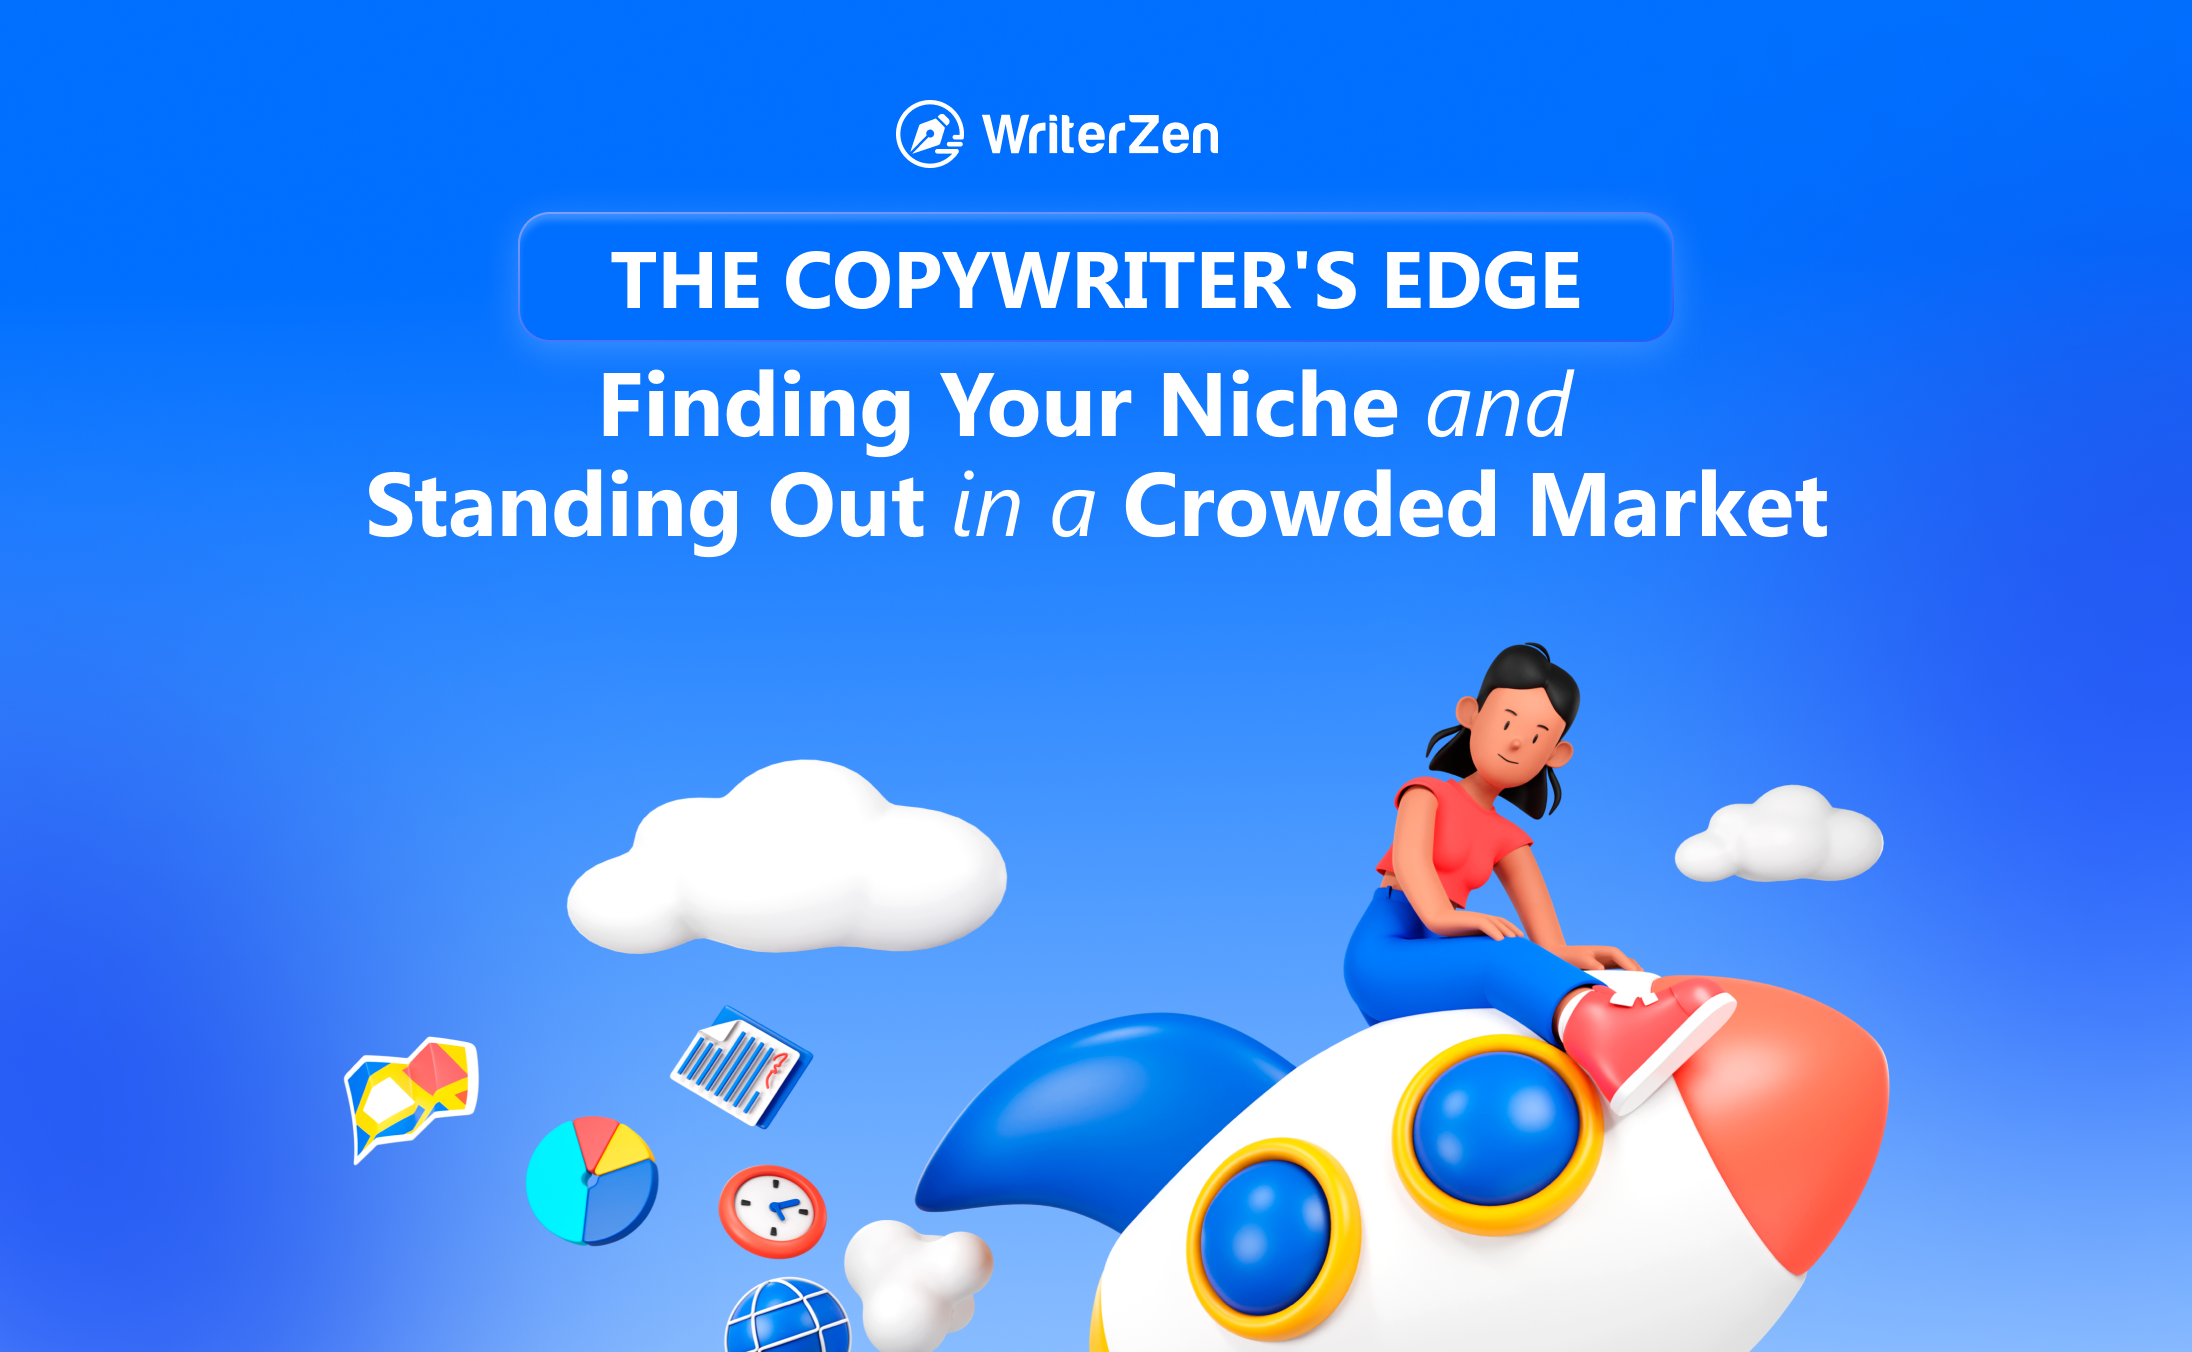 The Copywriter's Edge: Finding Your Niche and Standing Out in a Crowded Market